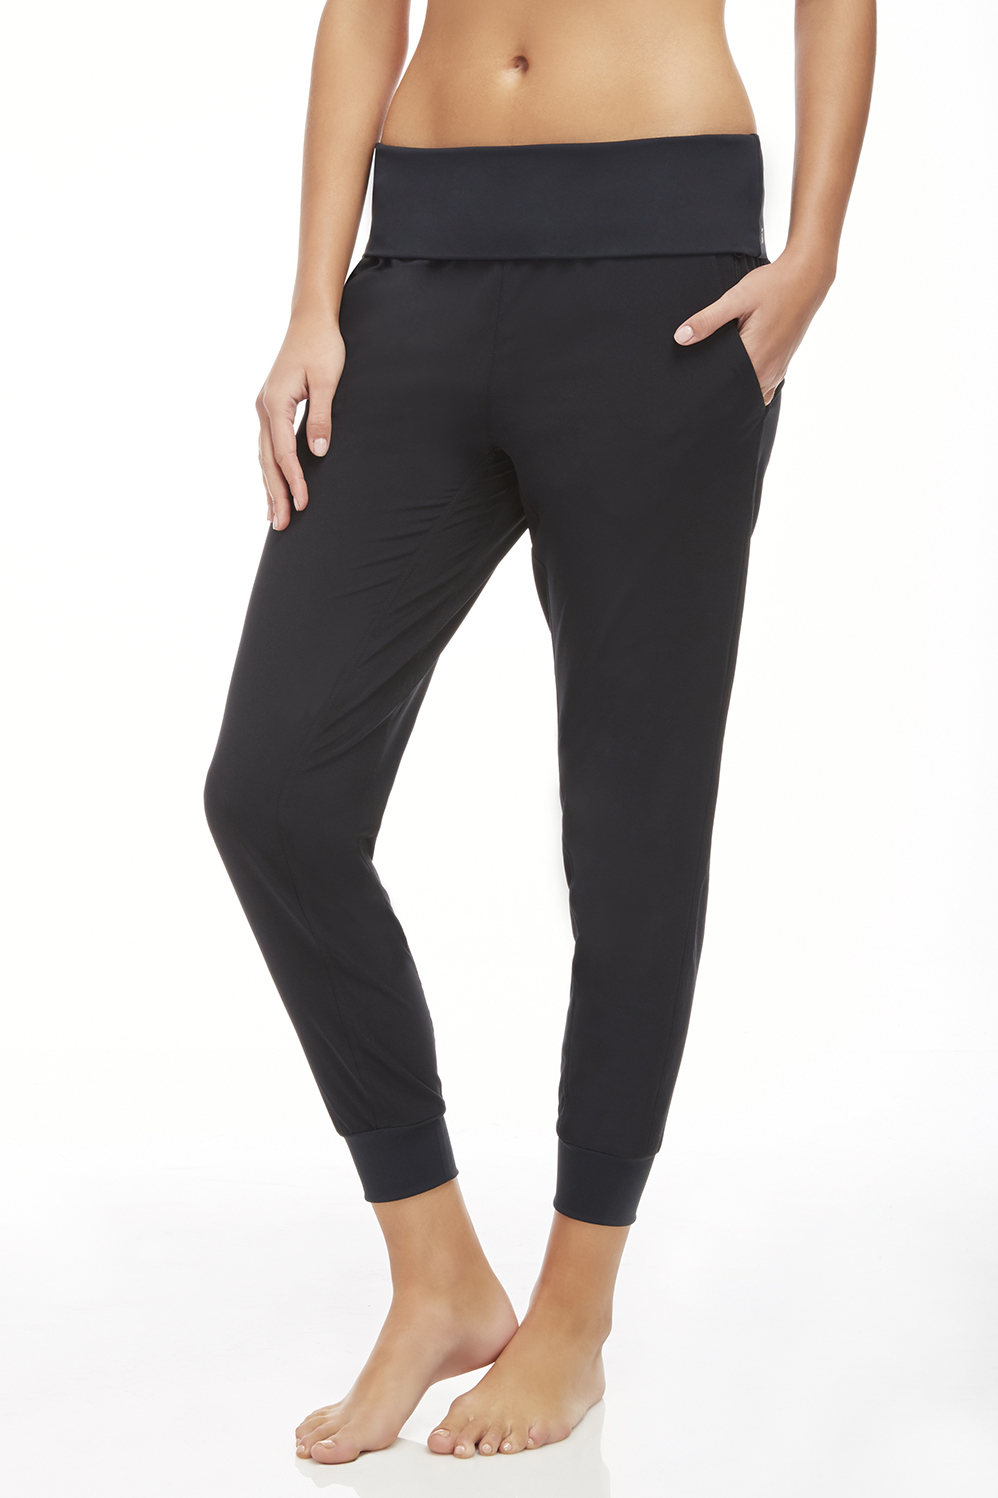 Labaree Pant in black - Get great deals at Fabletics